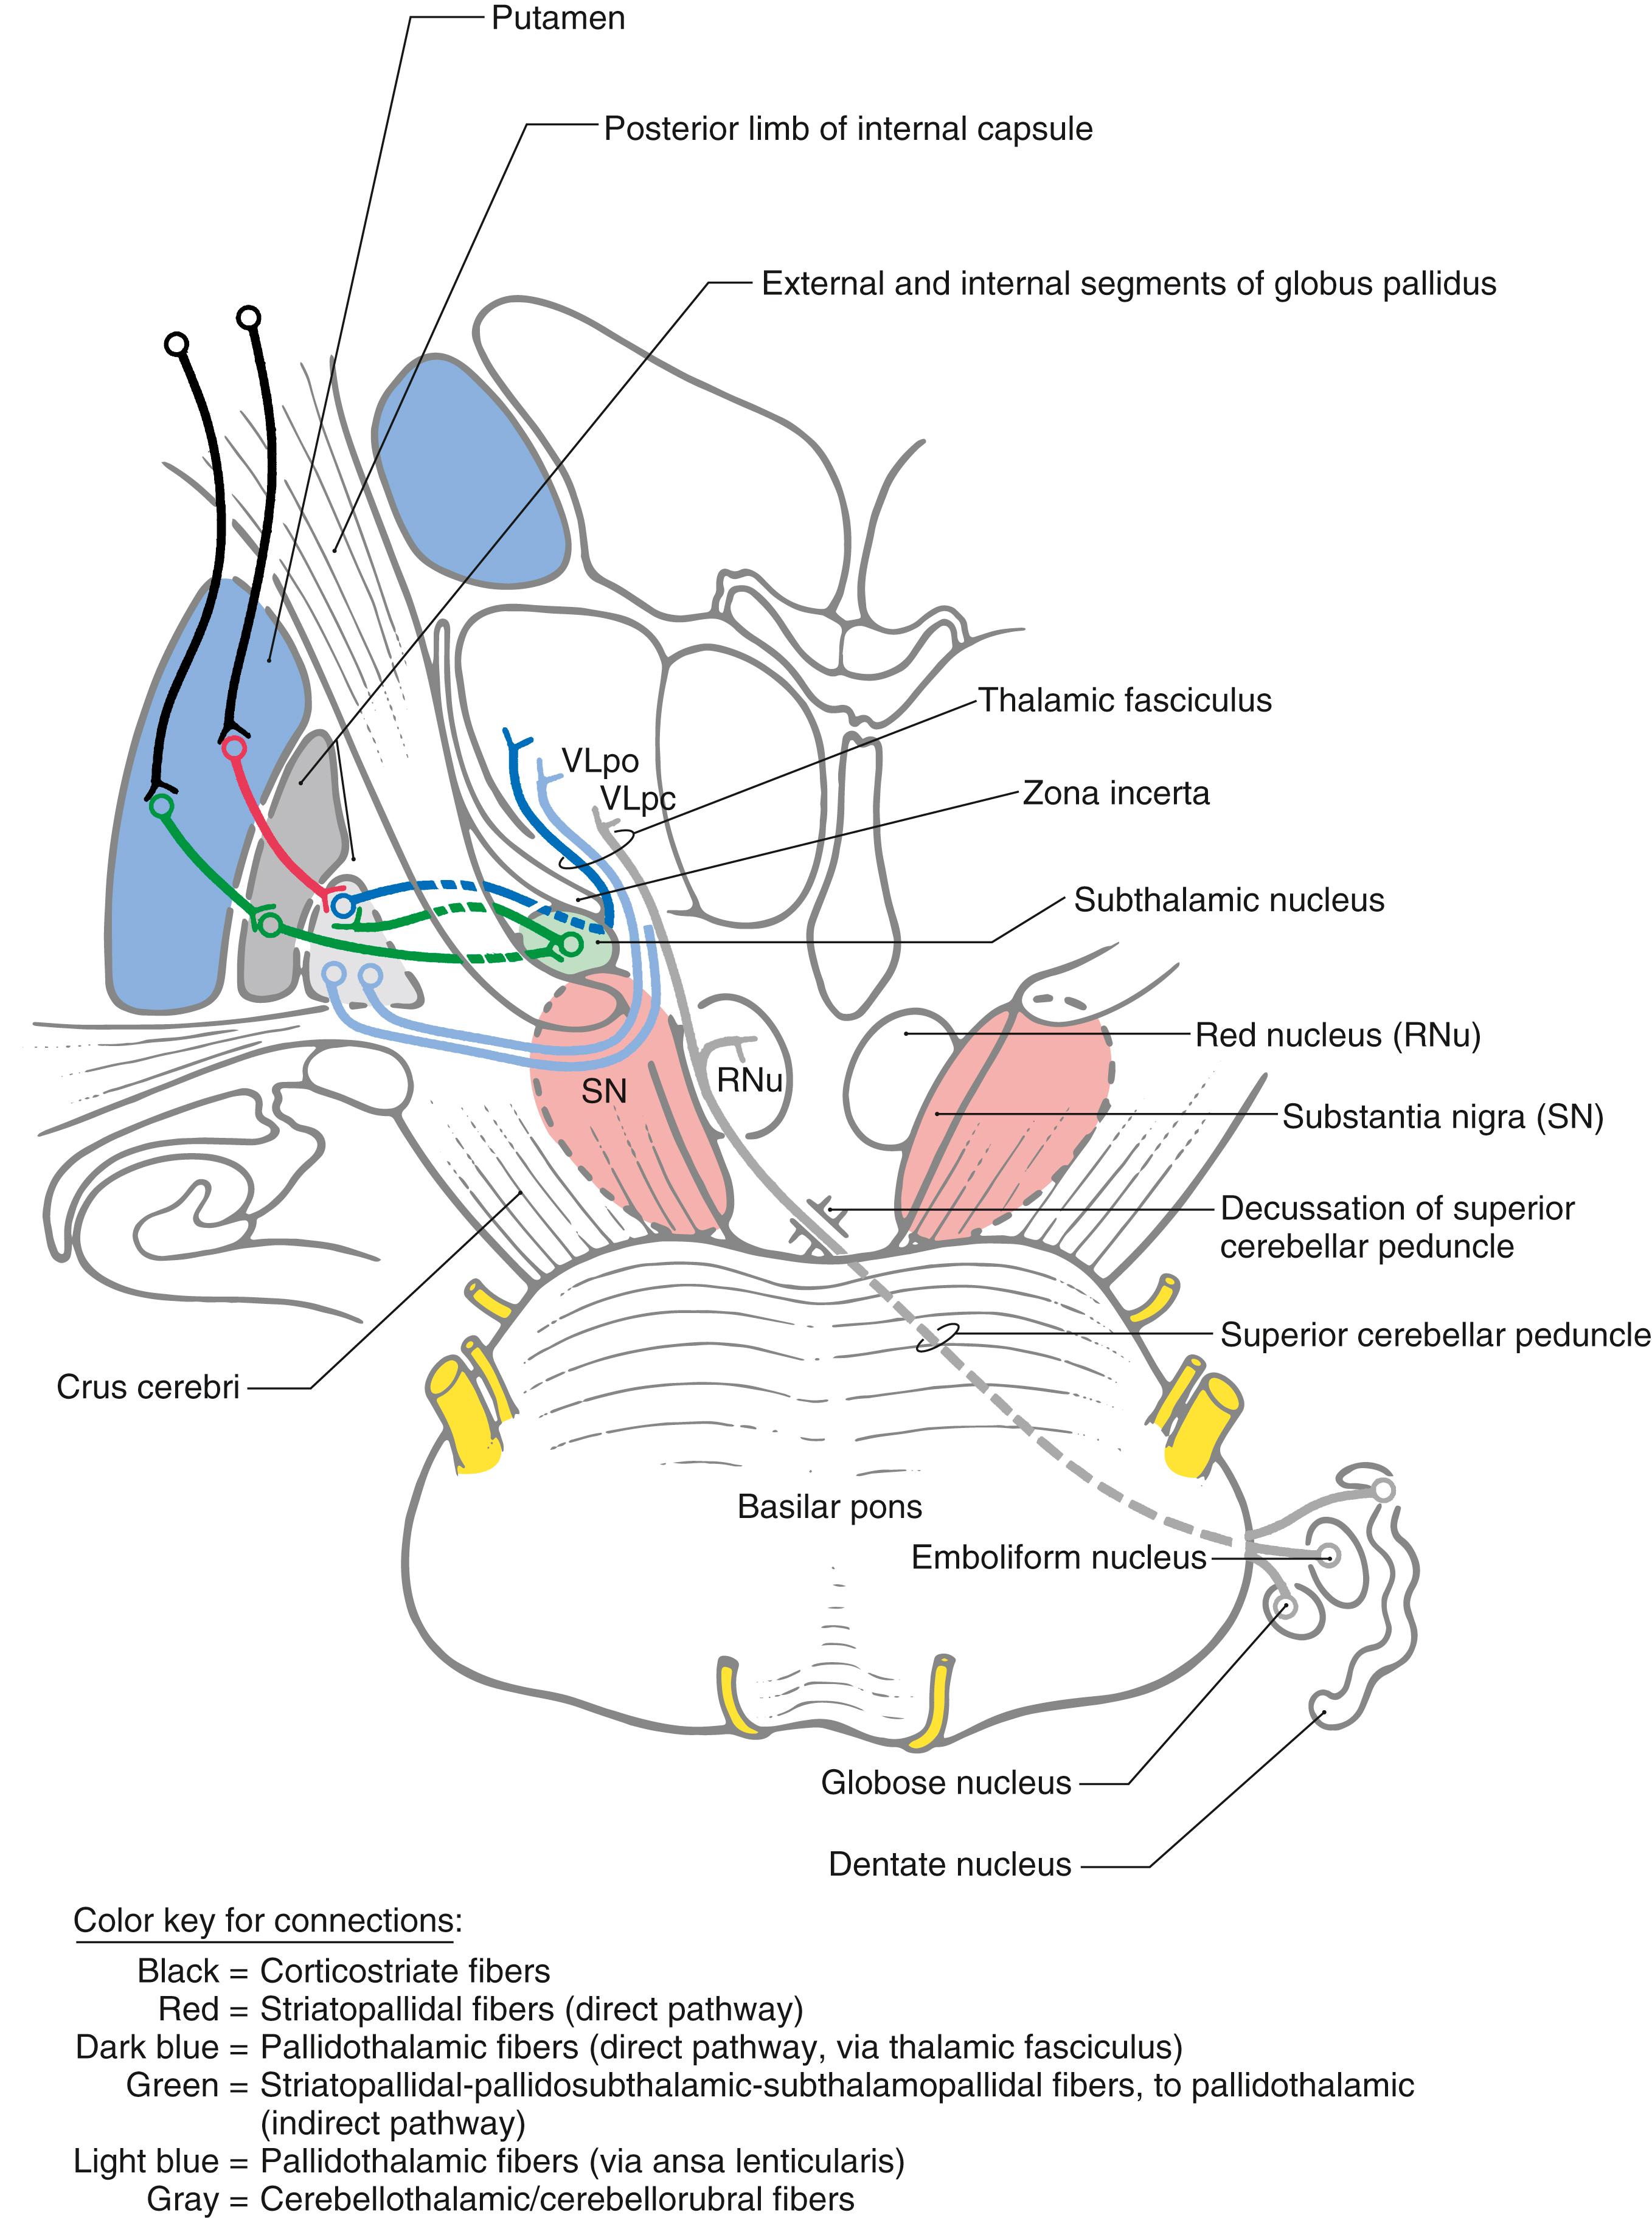 Fig. 26.9, Three-dimensional representation of the connections of the basal nuclei, excluding those with the substantia nigra. Fibers of the thalamic fasciculus ( dark blue ) traverse the internal capsule, pass between the subthalamic nucleus and zona incerta, and then enter the thalamic fasciculus to access the VLpo. Fibers of the ansa lenticularis ( light blue ) arch around the rostromedial edge of the internal capsule and course caudally to enter the thalamic fasciculus en route to the VLpo. Pallidosubthalamic and subthalamopallidal fibers (both green ) collectively form the subthalamic fasciculus. Cerebellothalamic fibers from the contralateral cerebellar nuclei also use the thalamic fasciculus to get to the VLpc. VLpc, ventral lateral thalamic nucleus, pars caudalis; VLpo, ventral lateral thalamic nucleus, pars oralis.